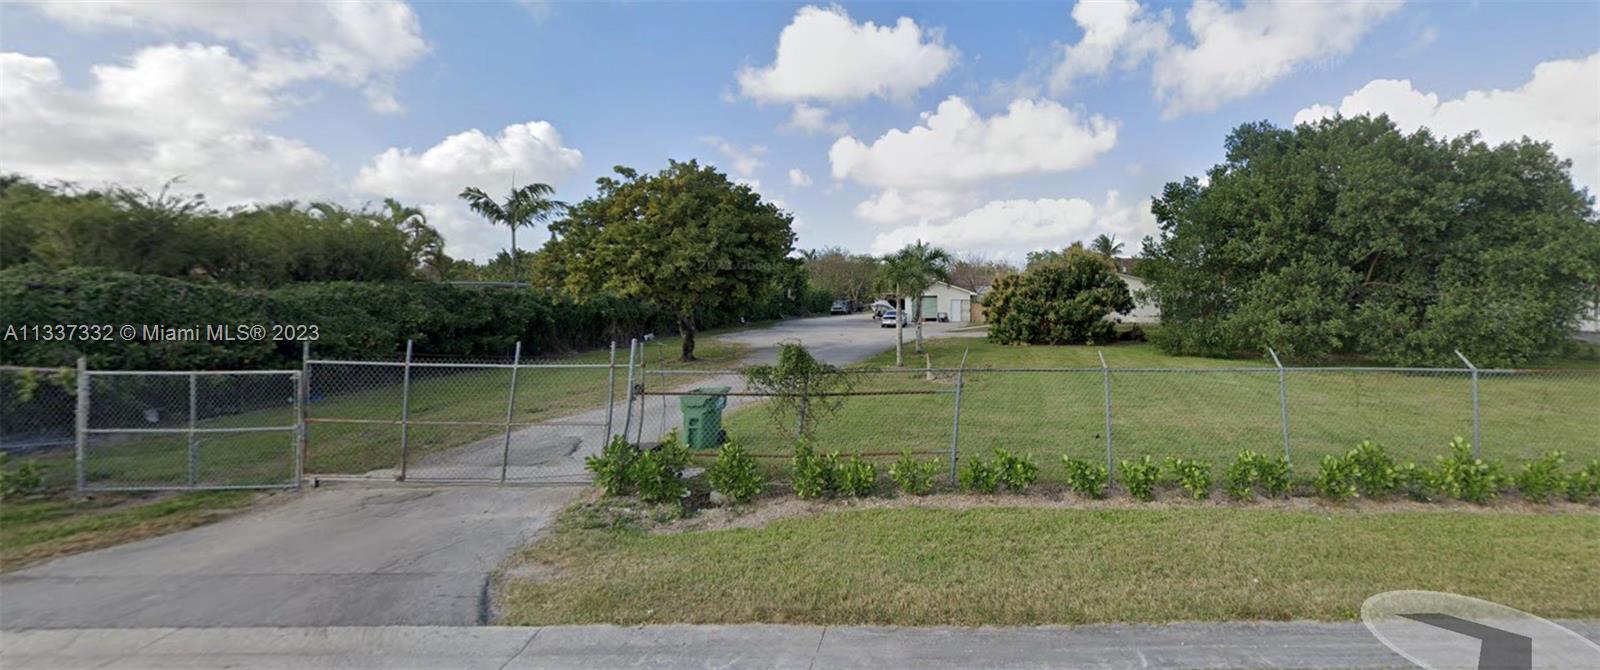 Photo 1 of 12271 46th St in Miami - MLS A11337332